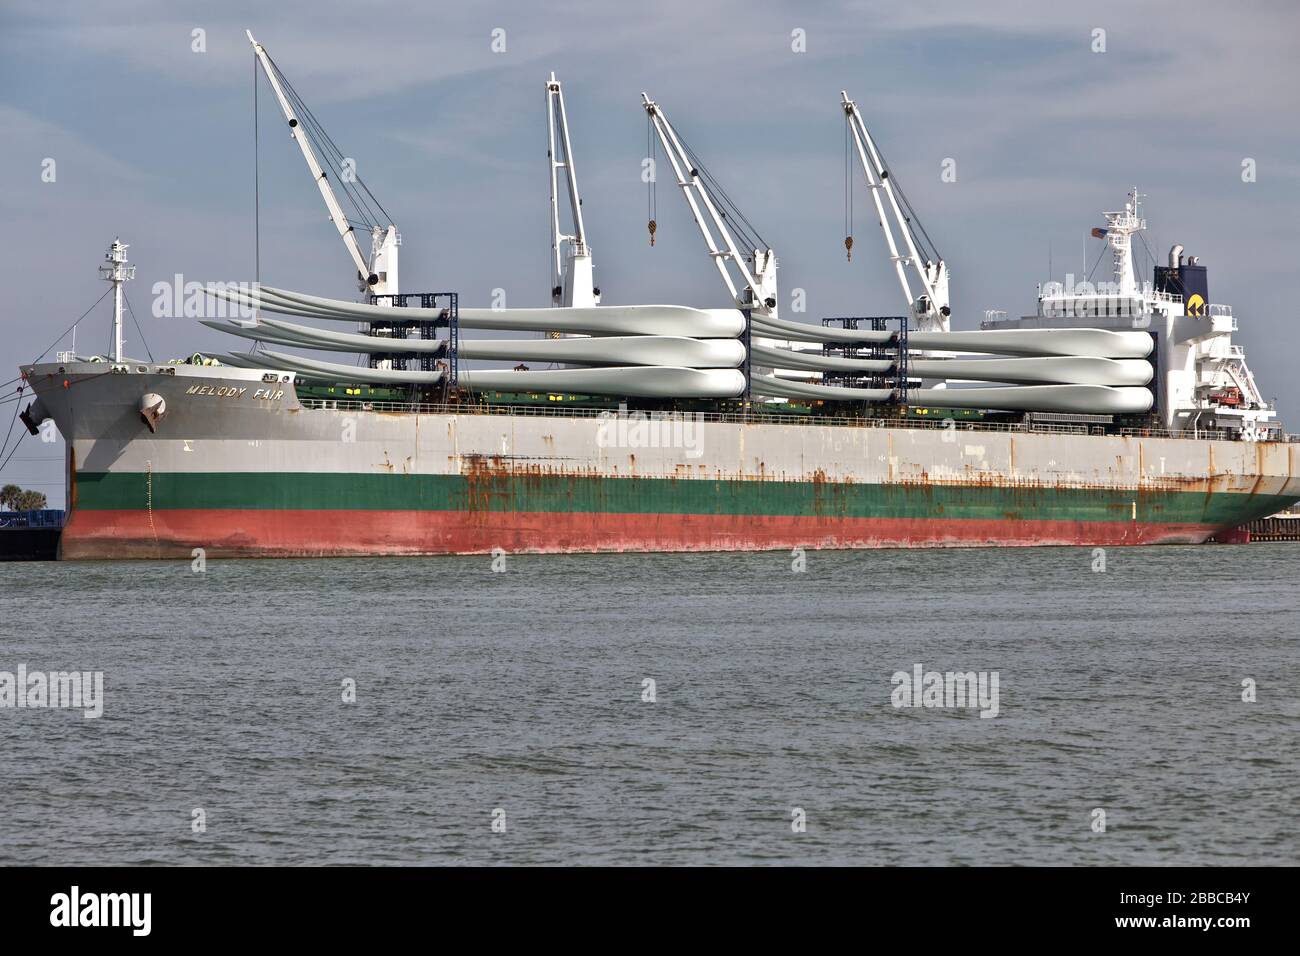 Giant Wind Turbine Propeller Blades preparing to offload  from freighter,   Port Aransas, Texas, Stock Photo